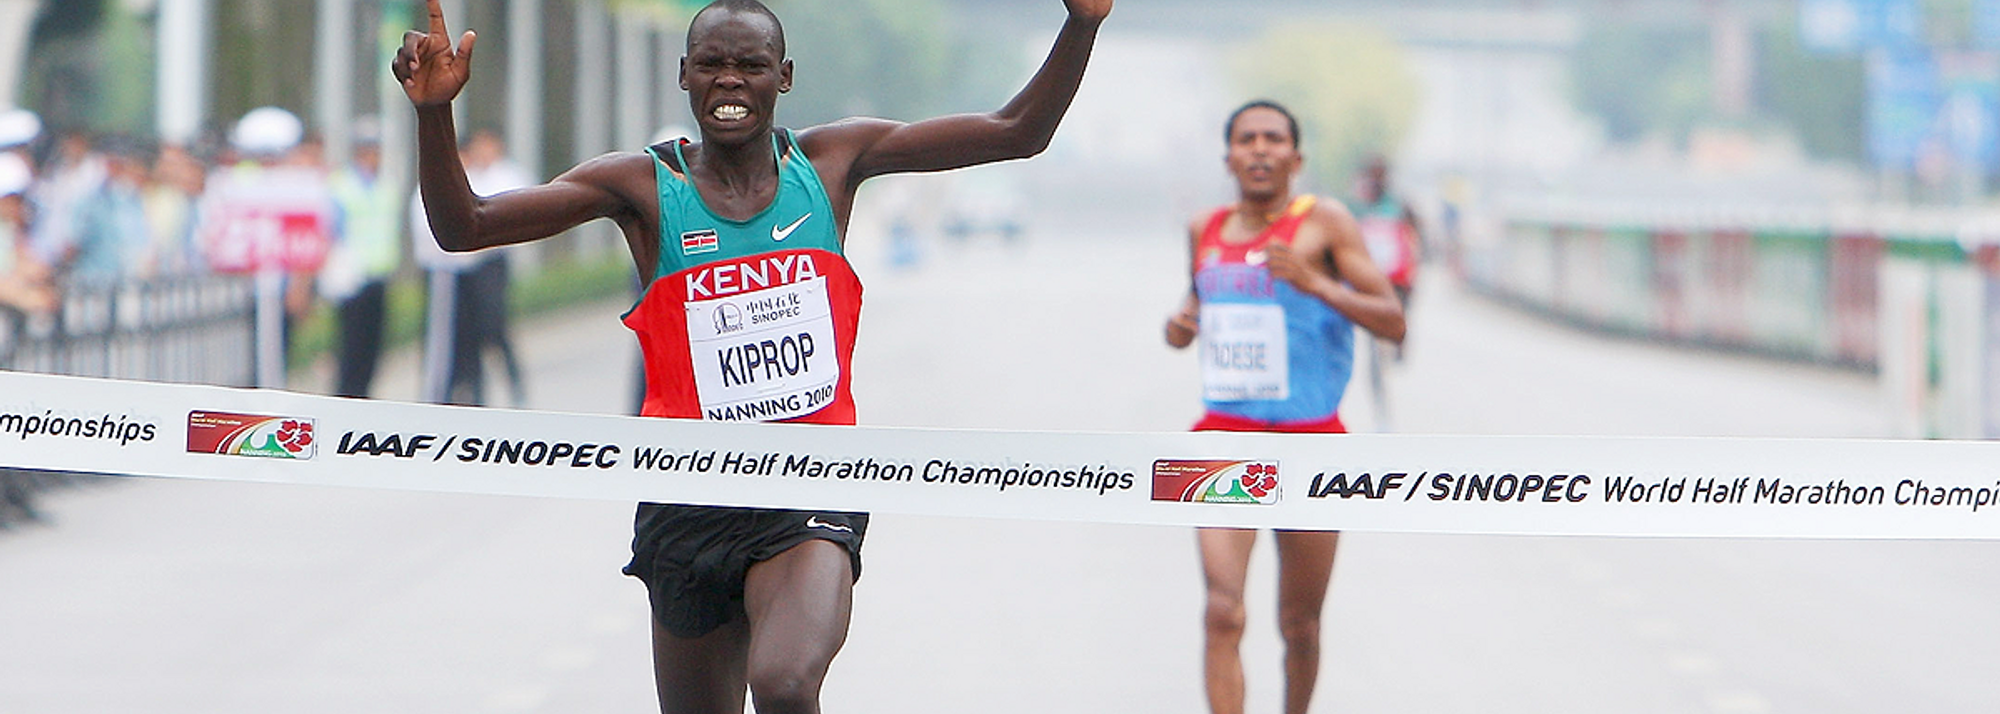 Nanning, China – After an epic battle over the final two kilometres, Wilson Kiprop of Kenya upset Zersenay Tadese to take the men’s title at the IAAF / SINOPEC World Half Marathon Championships in Nanning, China, today (16).<BR>